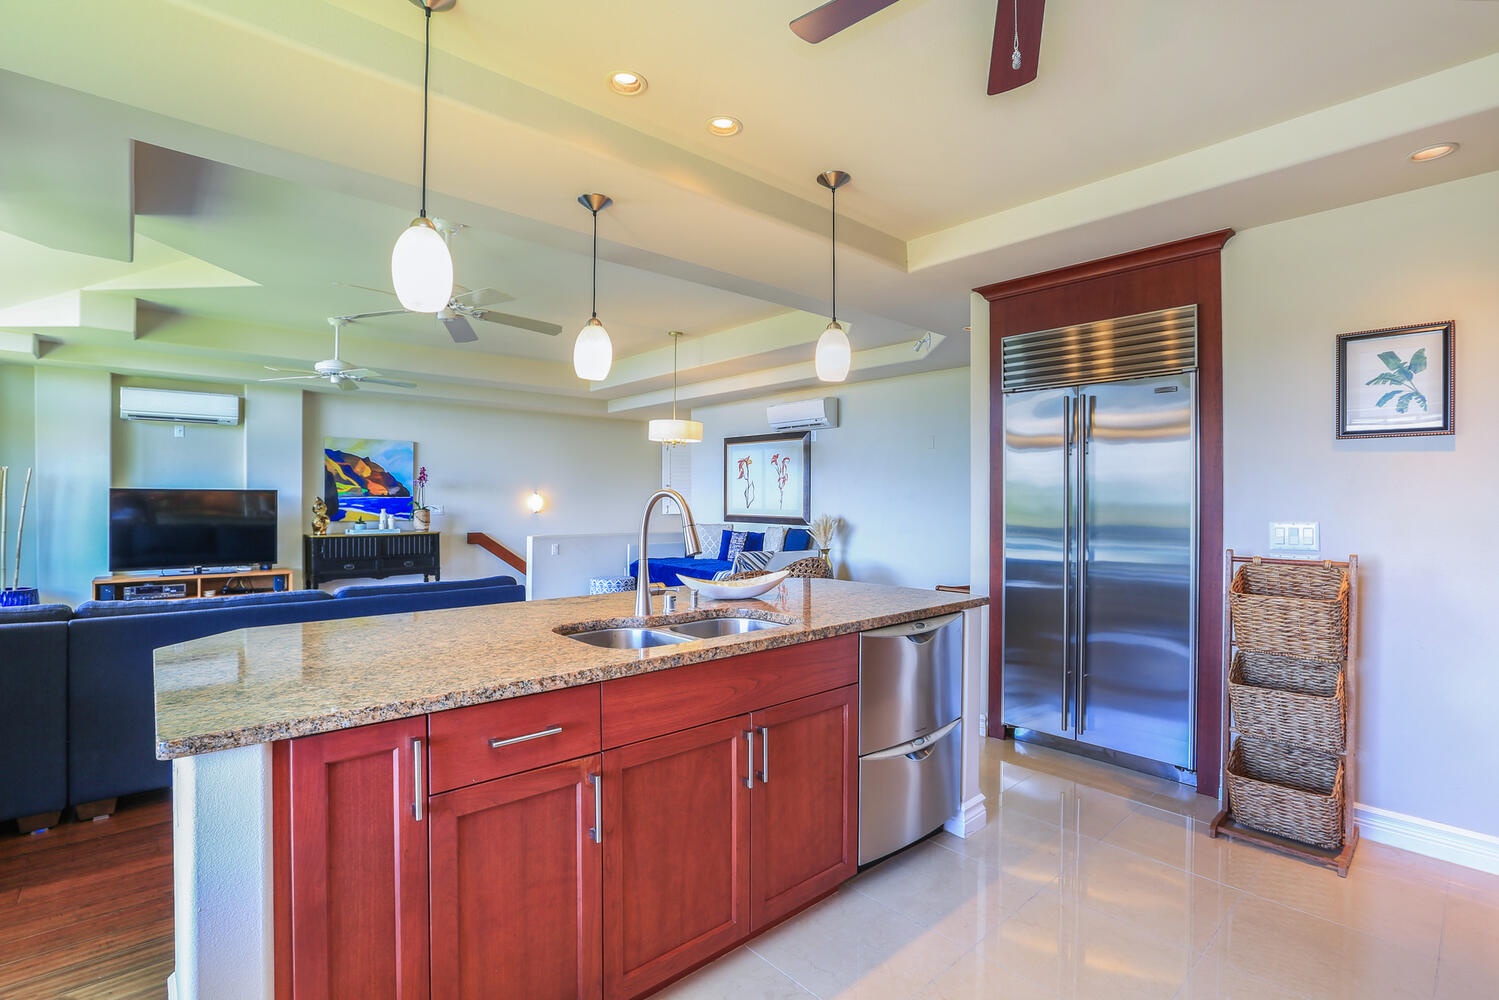 Princeville Vacation Rentals, Noelani Kai - Wide countertops with plenty of cabinets for storage and clutter free culinary space.